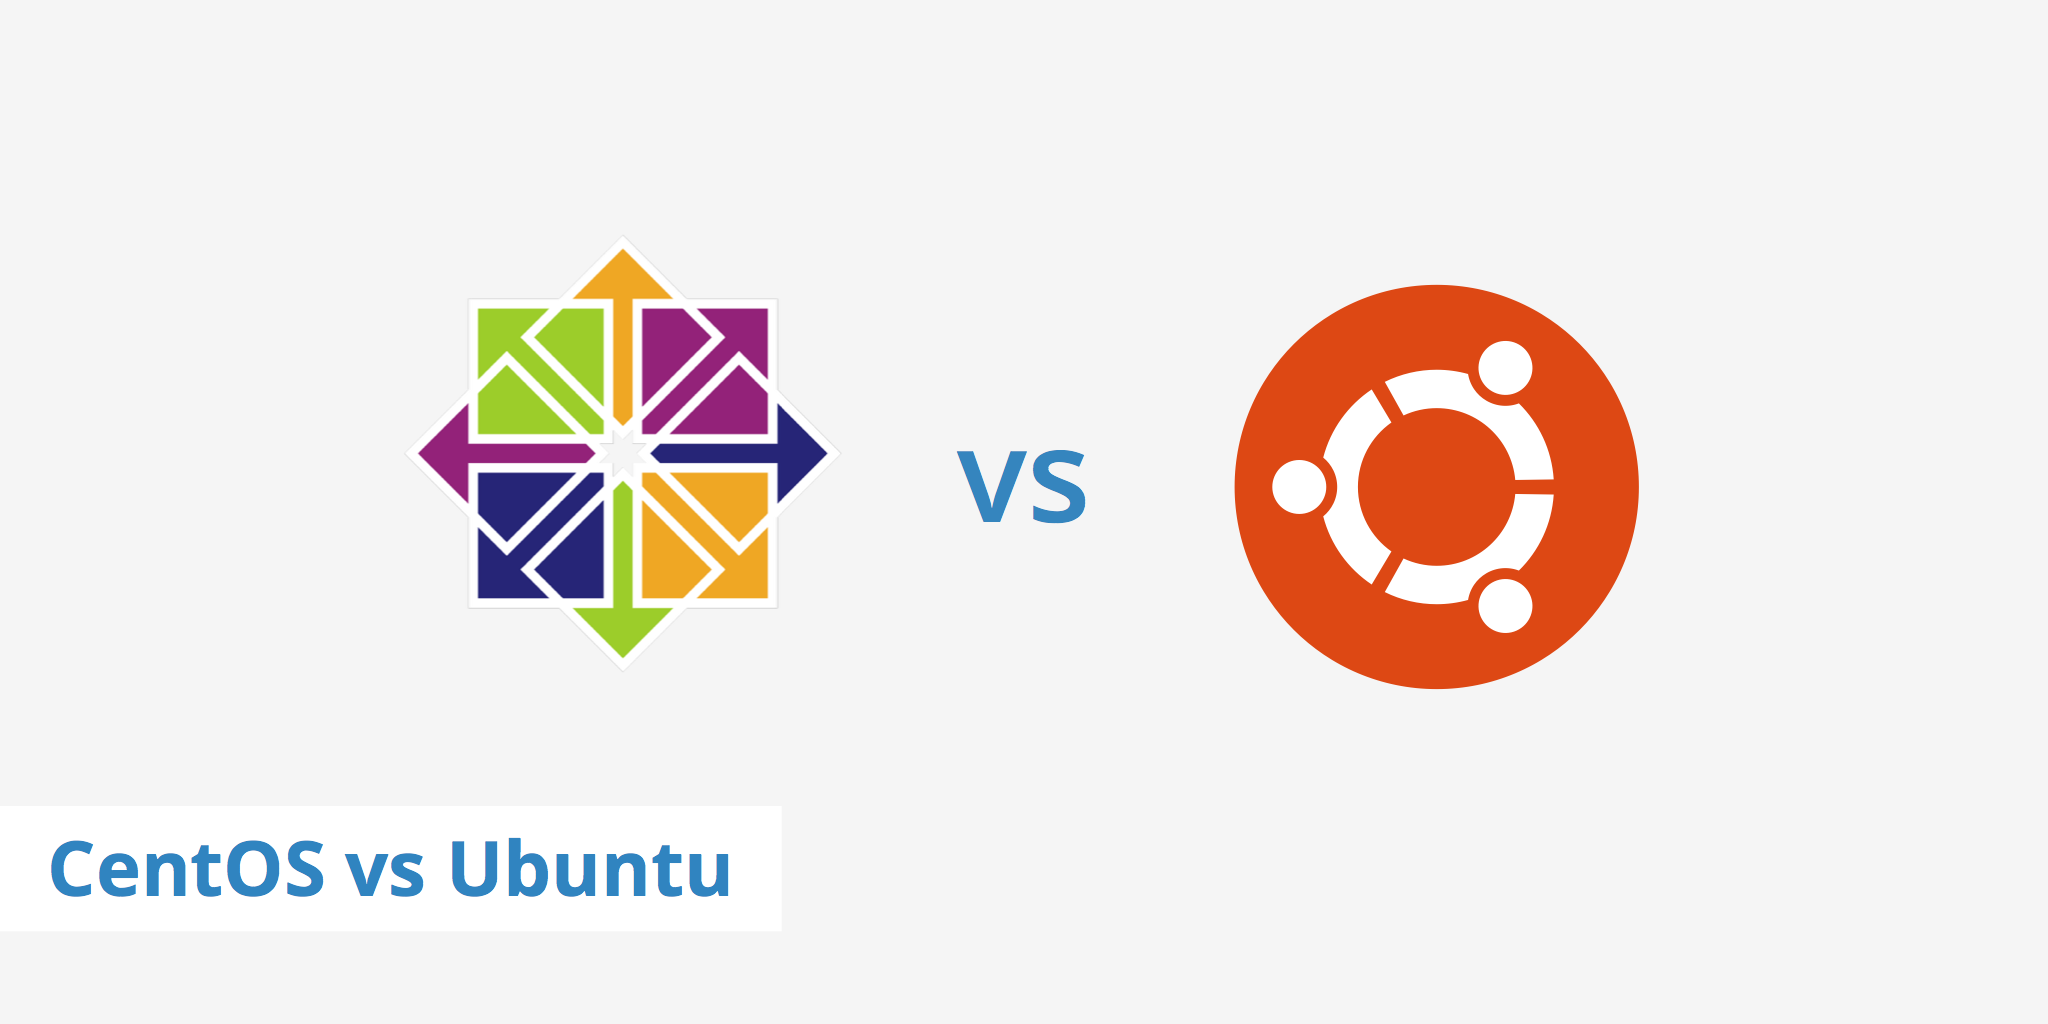 centos or ubuntu - which one is better